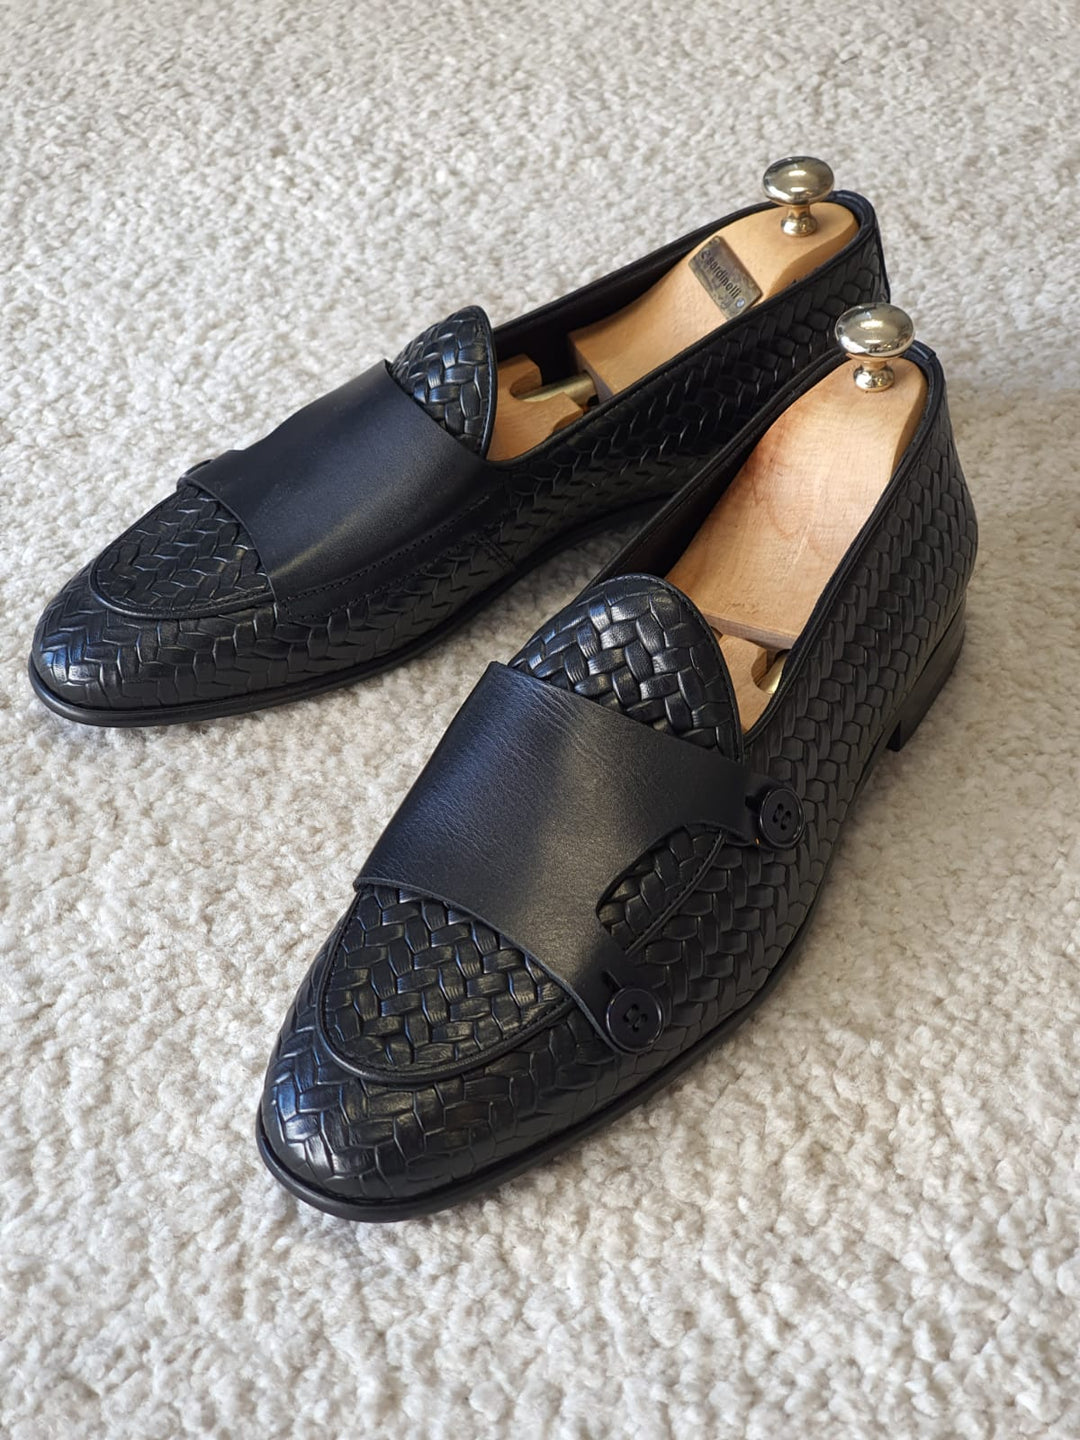 Vince MenStyleWith Double Button Knitted Leather Black Loafer - MenStyleWith